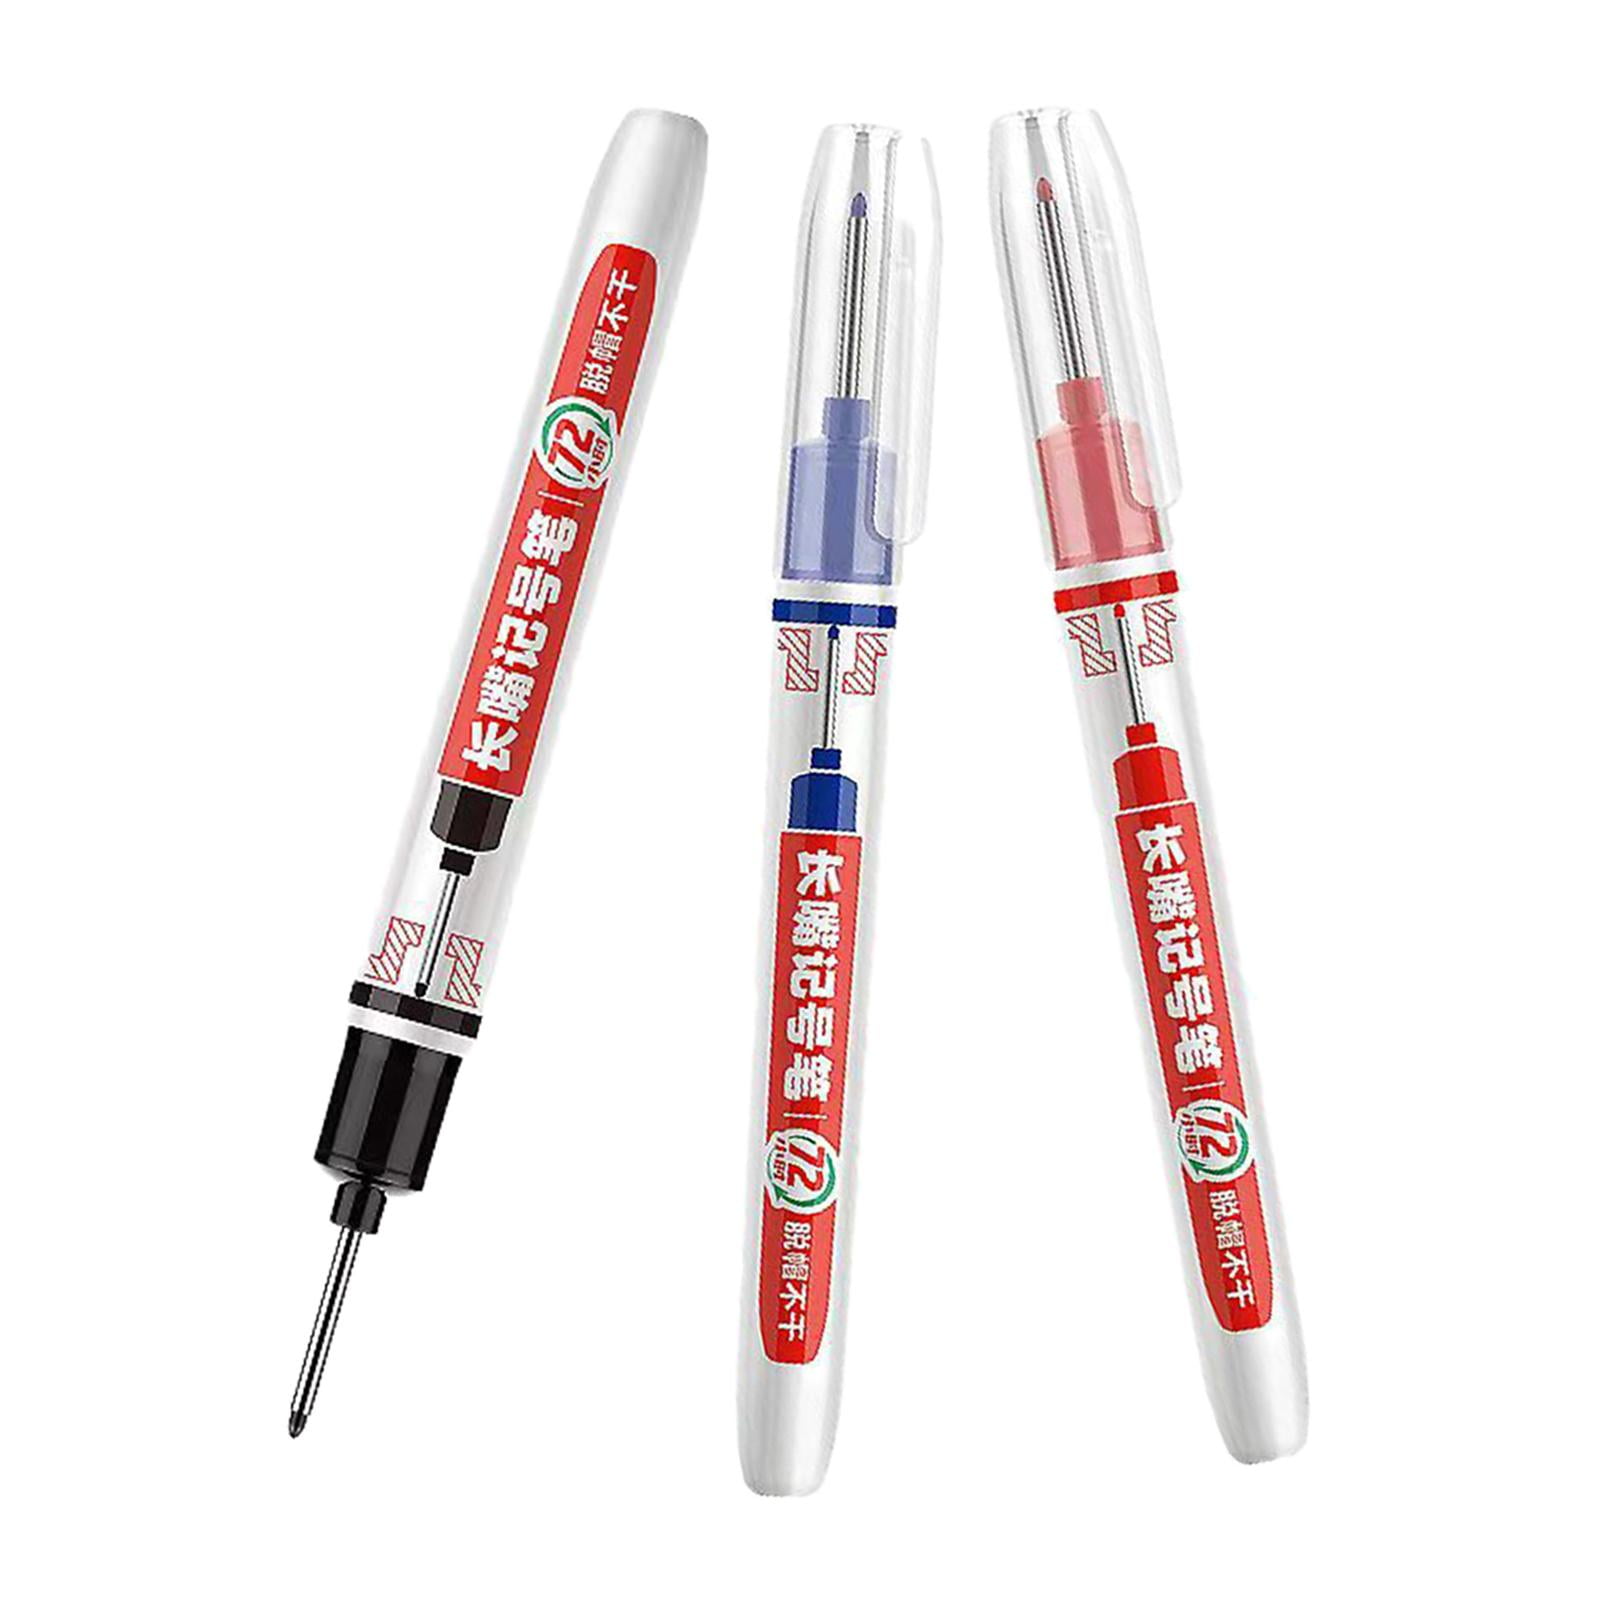 1pc Long Nib Marker Pen 32mm, For Woodworking & Tiling, Quick-drying,  Waterproof, Fade-resistant, Random Color